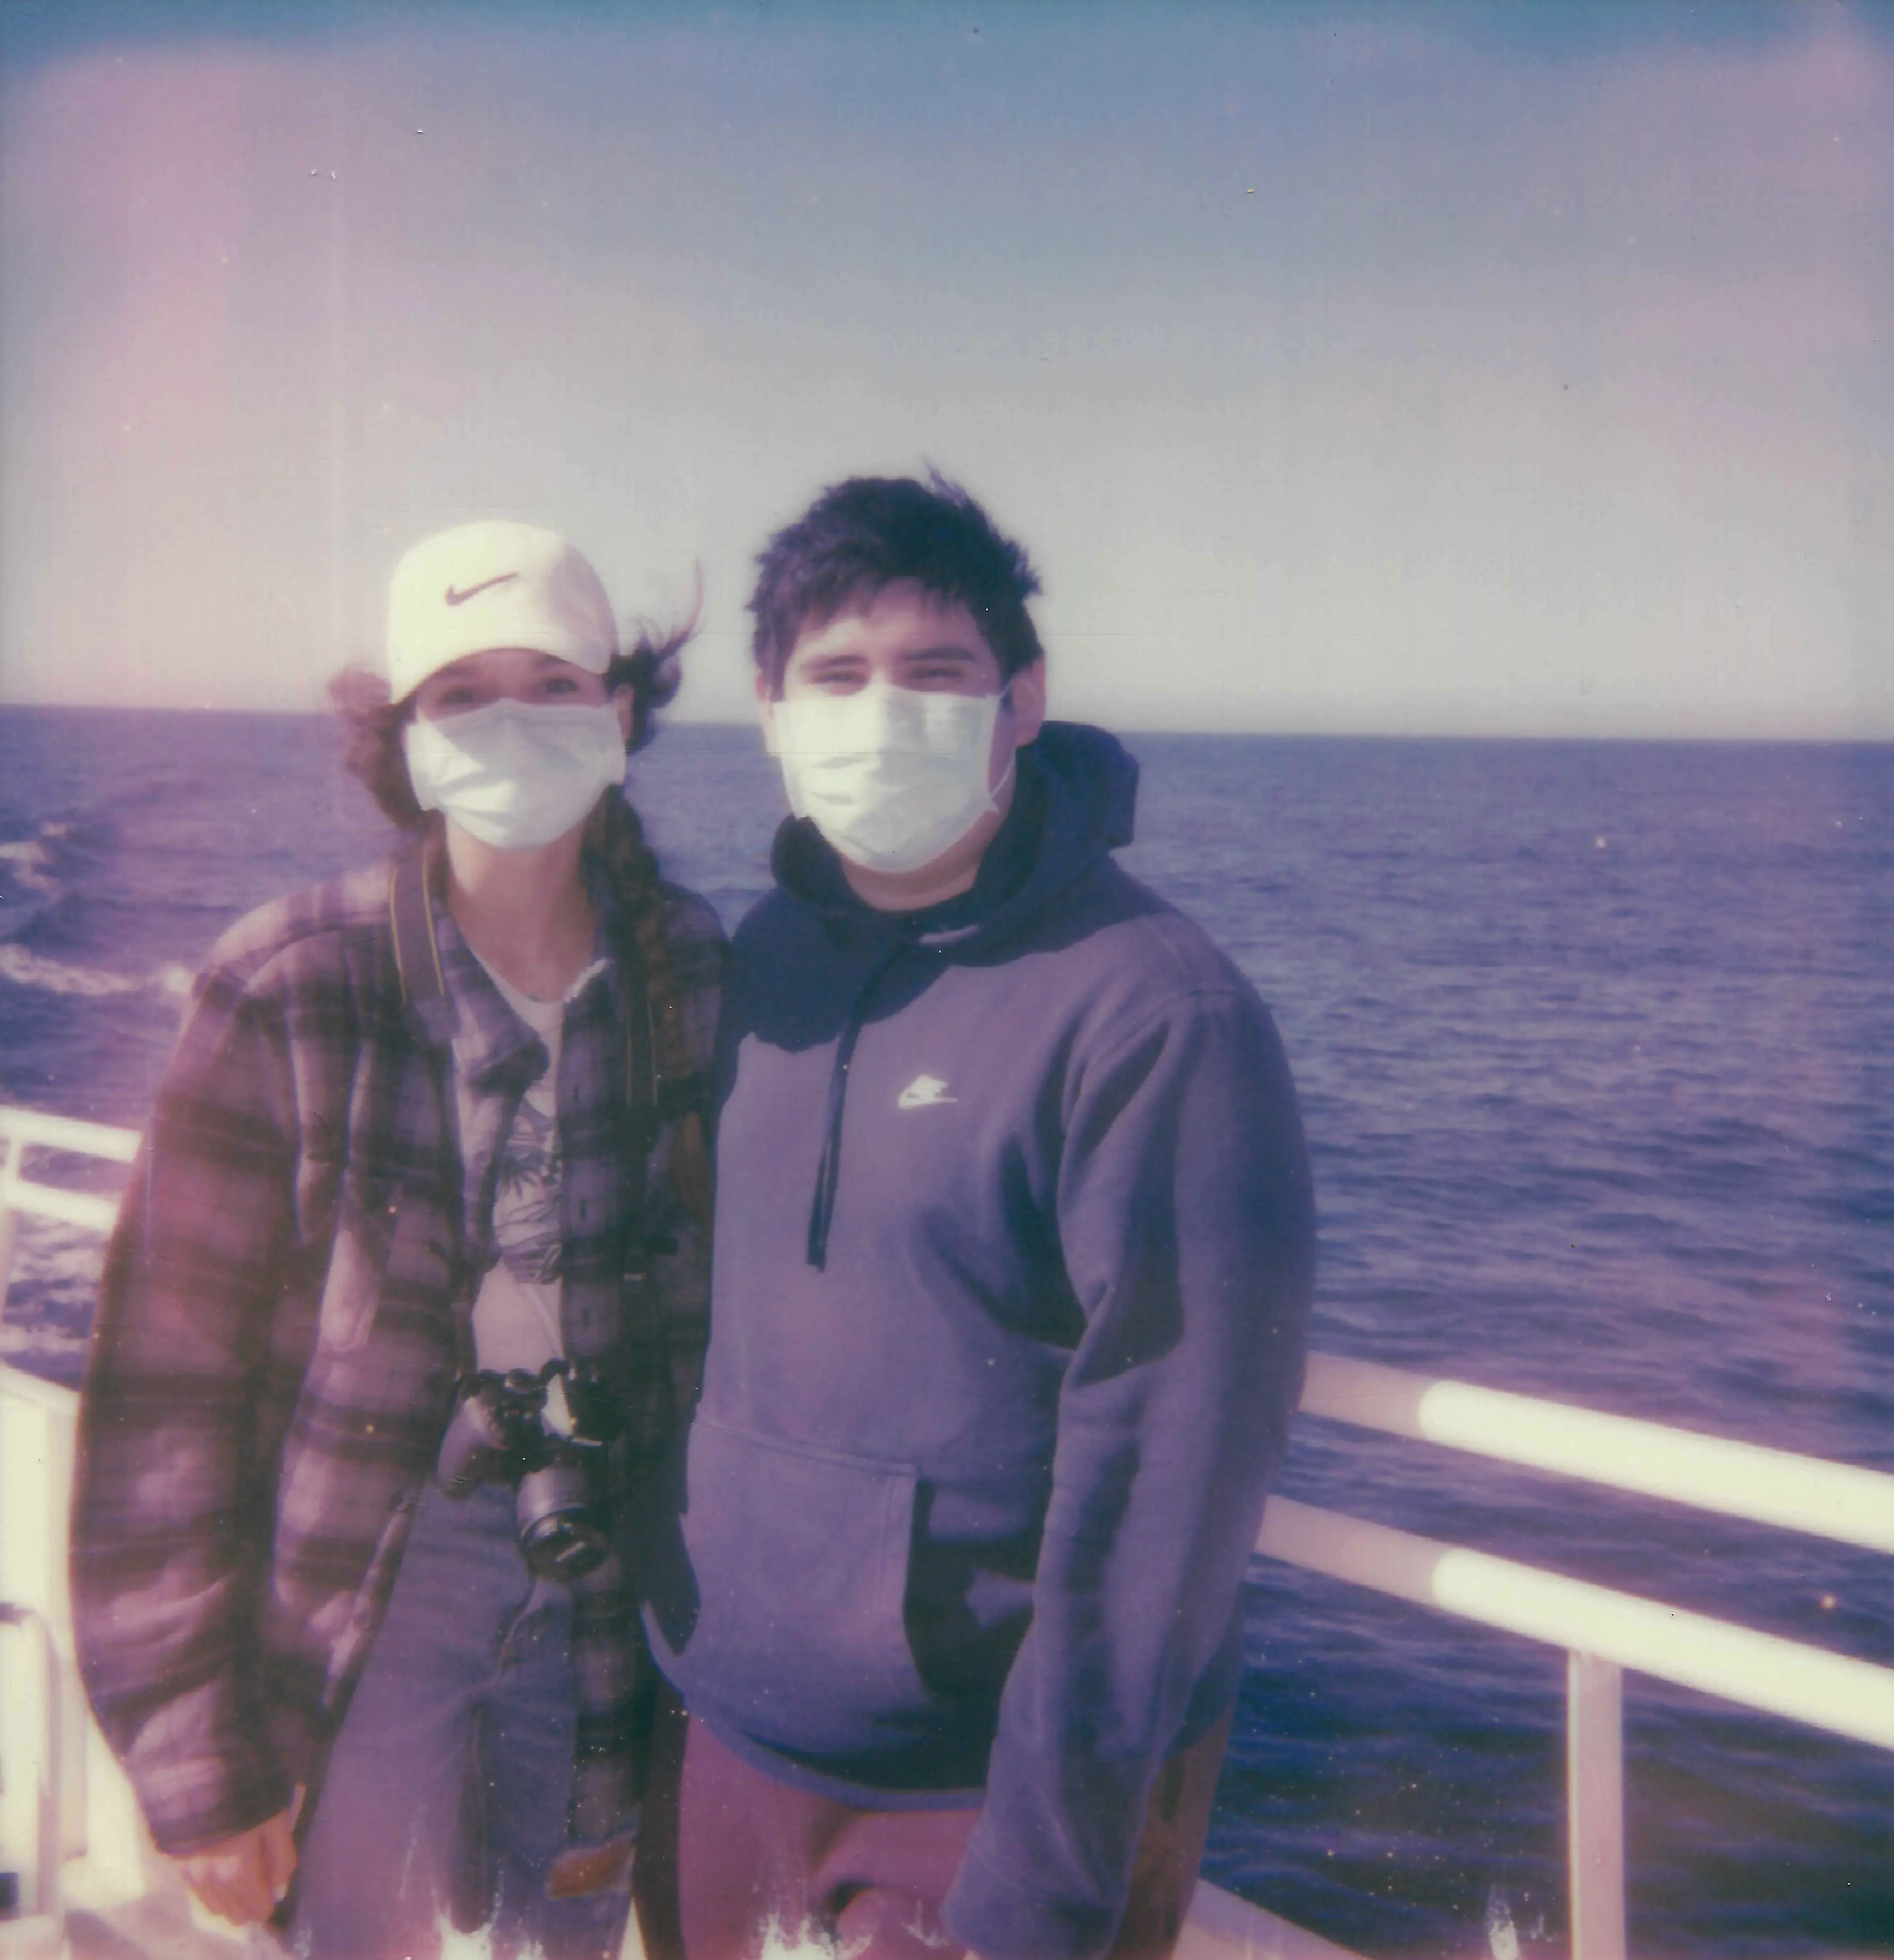 Second image of Juan Pablo and Cousing on a Boat